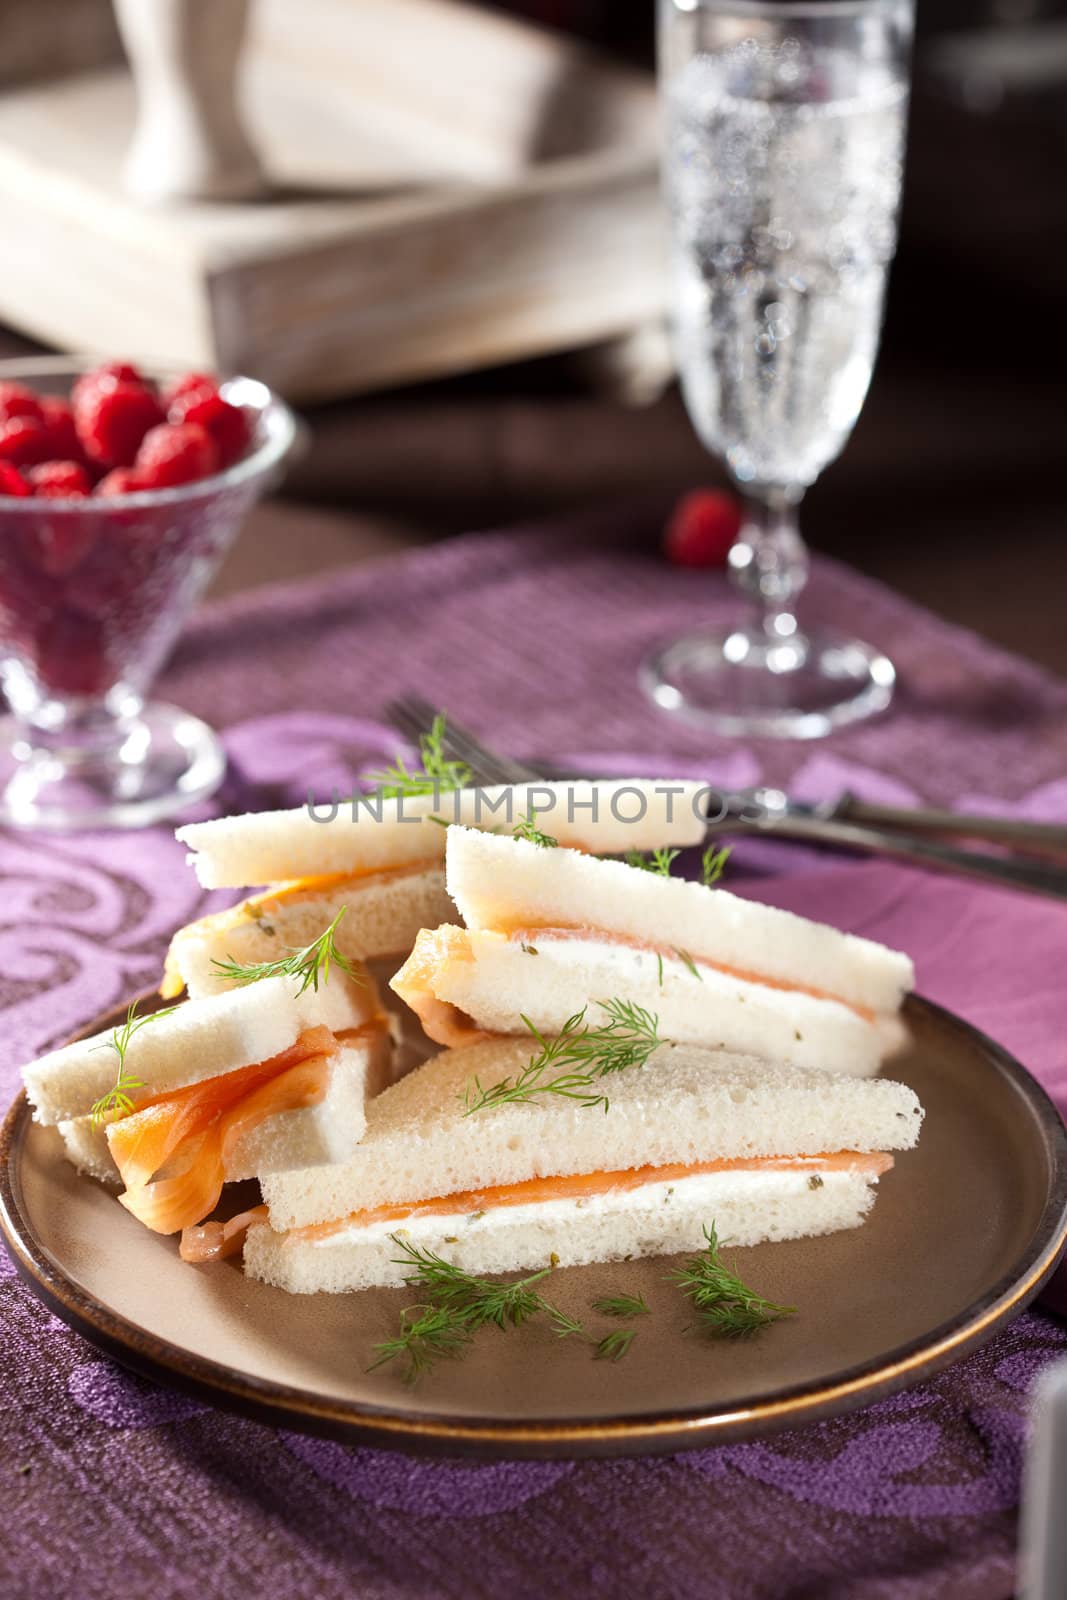 Small sandwiches for high tea with salmon and creamcheese